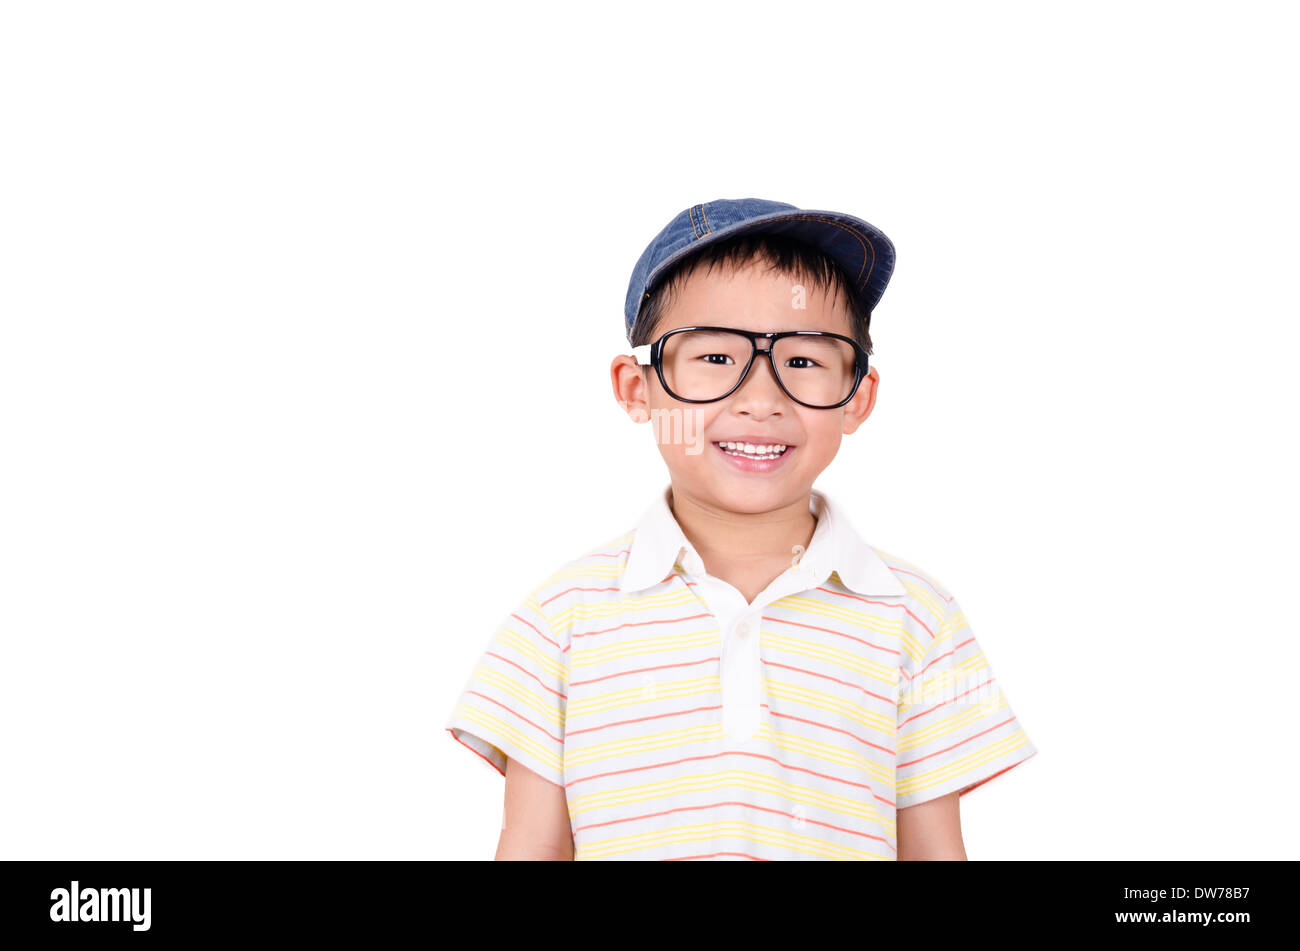 Cute boy smiling on the white background Stock Photo